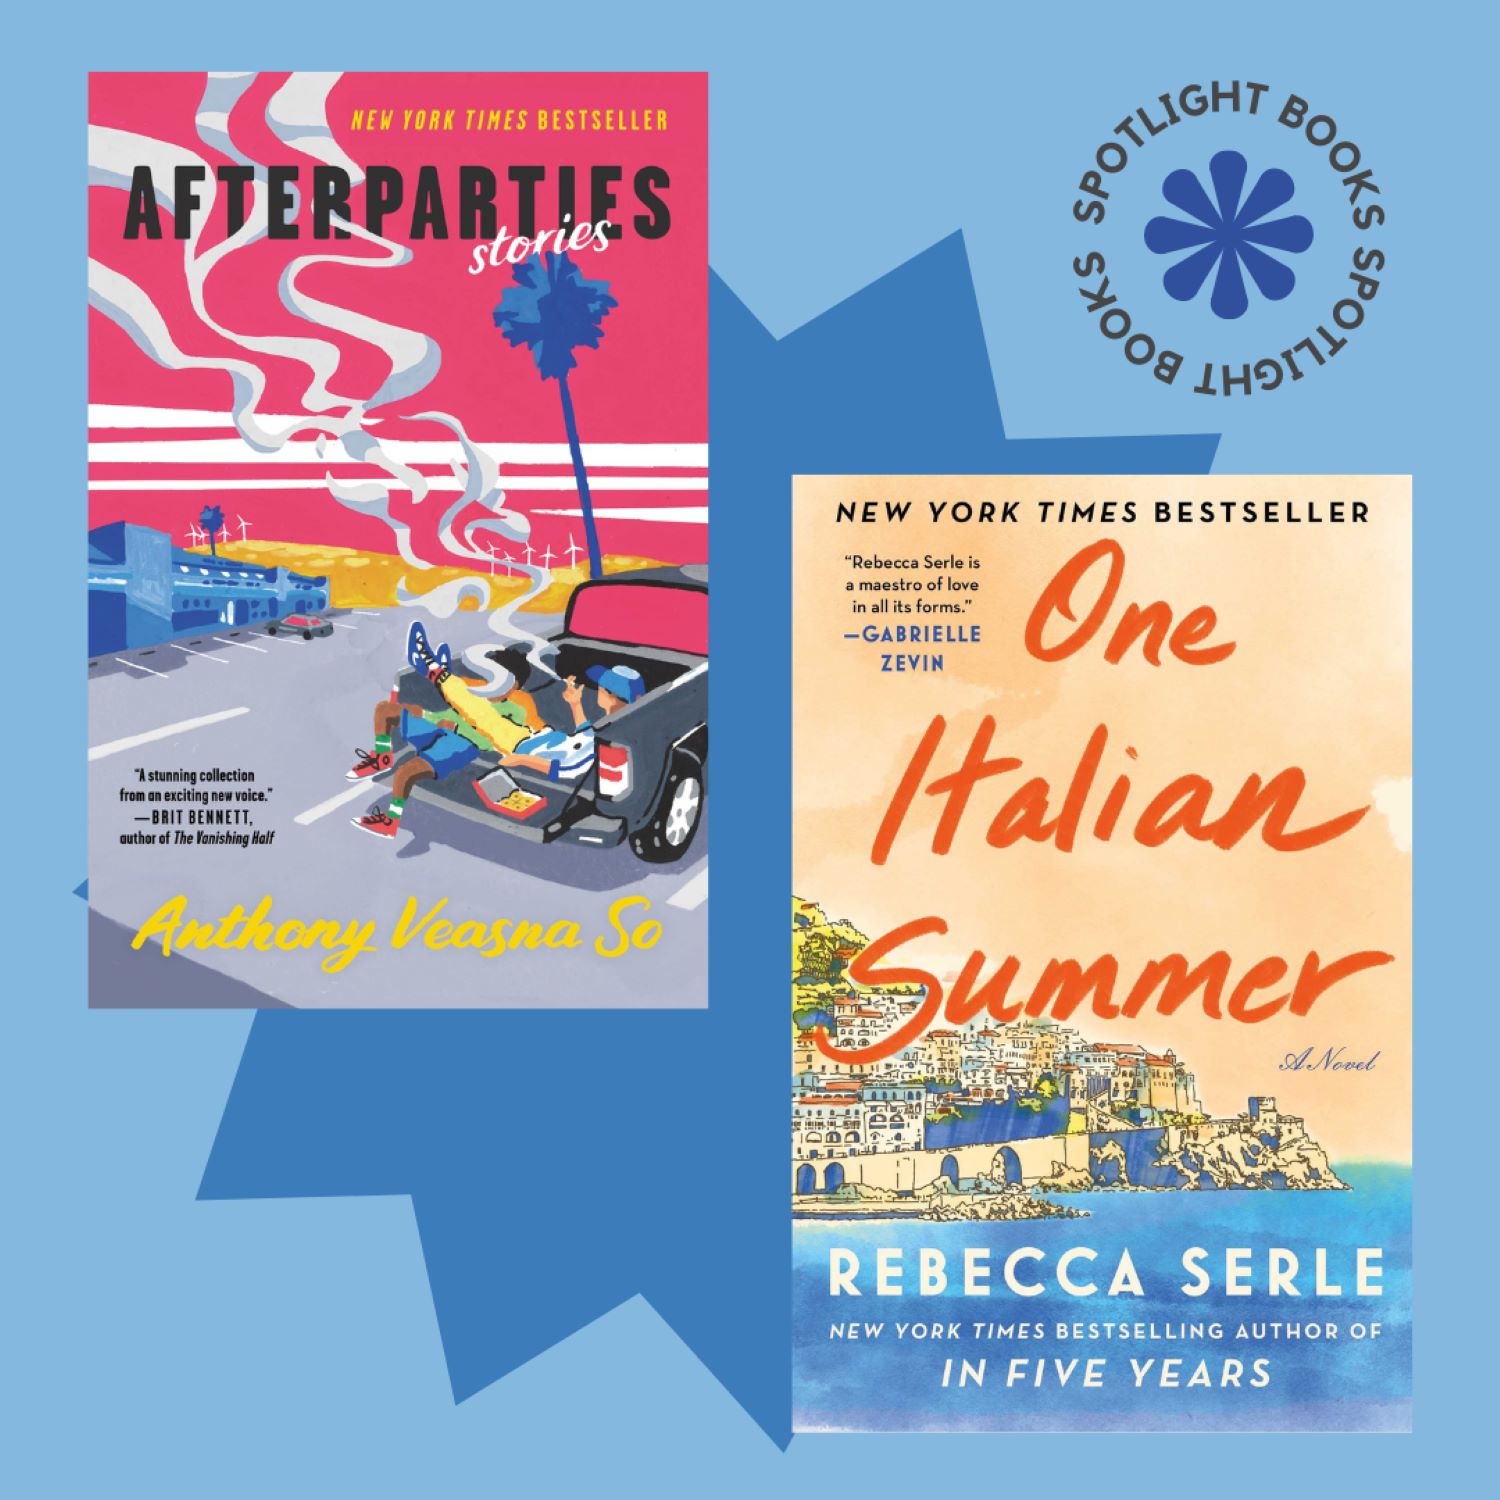 This gloomy Thursday has us dreaming of sunny afternoons spent lakeside with a good book. And while the sunshine might be in short supply today, you can still stock up on some of the best summer reads at the #HoweLibrary! Check out ONE ITALIAN SUMMER, AFTERPARTIES, and more popular reads on the first floor of the Howe Library or at the link in our bio. We promise these titles will definitely help you forget the humidity—at least for a minute. #summer #summerreads #tbr #spotlight #spotlightbooks #booksofinstagram #librariesofinstagram #UVM #UVMlibraries #heatwave #oneitaliansummer #afterparties